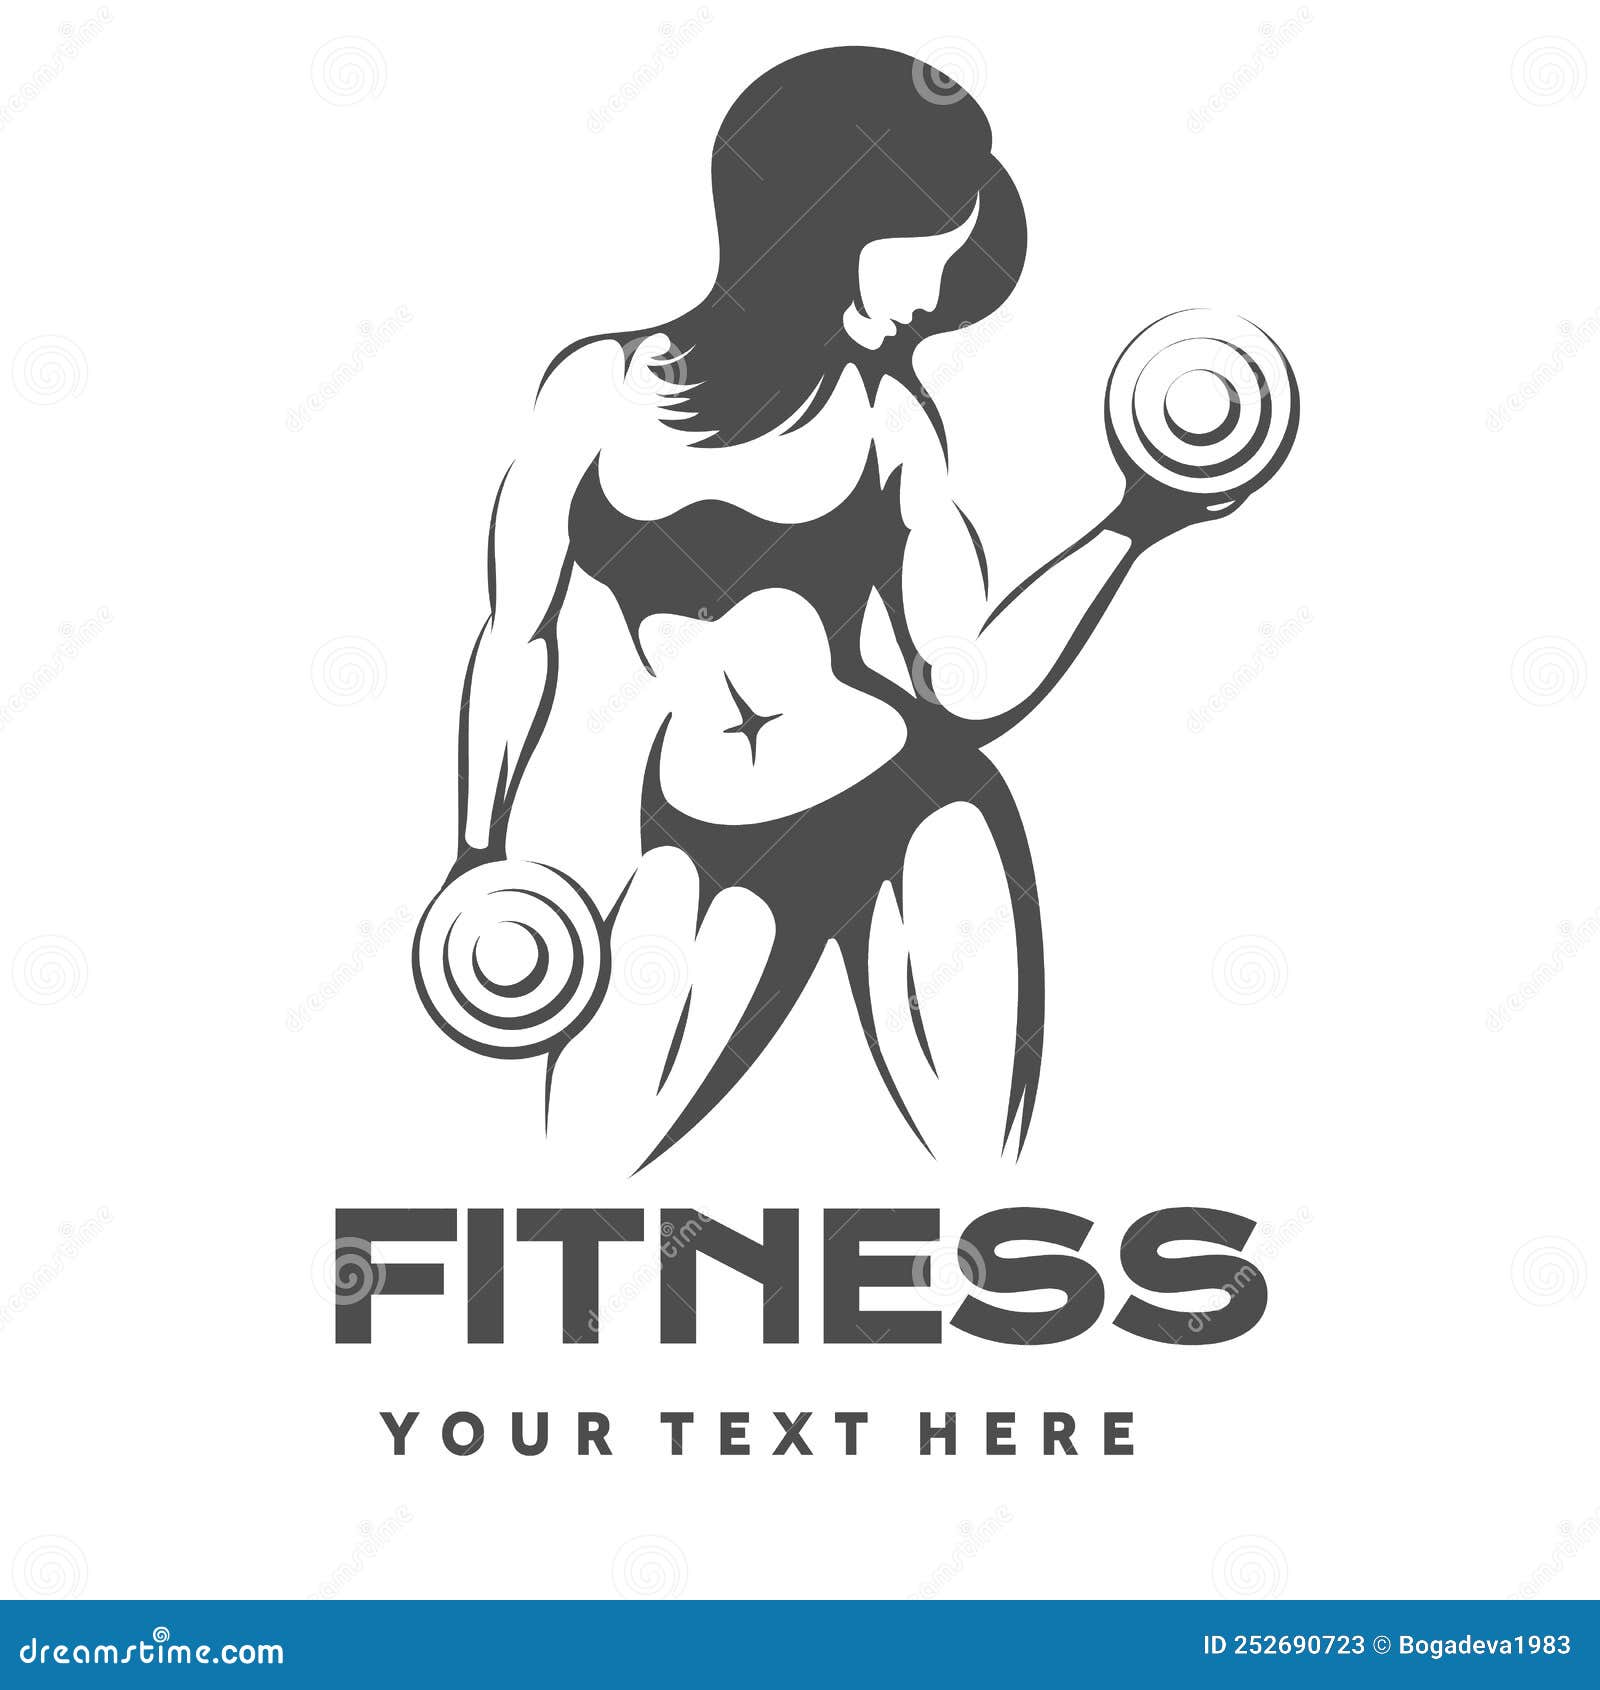 https://thumbs.dreamstime.com/z/fitness-logo-design-woman-silhouette-holding-weight-club-emblem-holds-dumbbells-vector-illustration-isolated-white-252690723.jpg